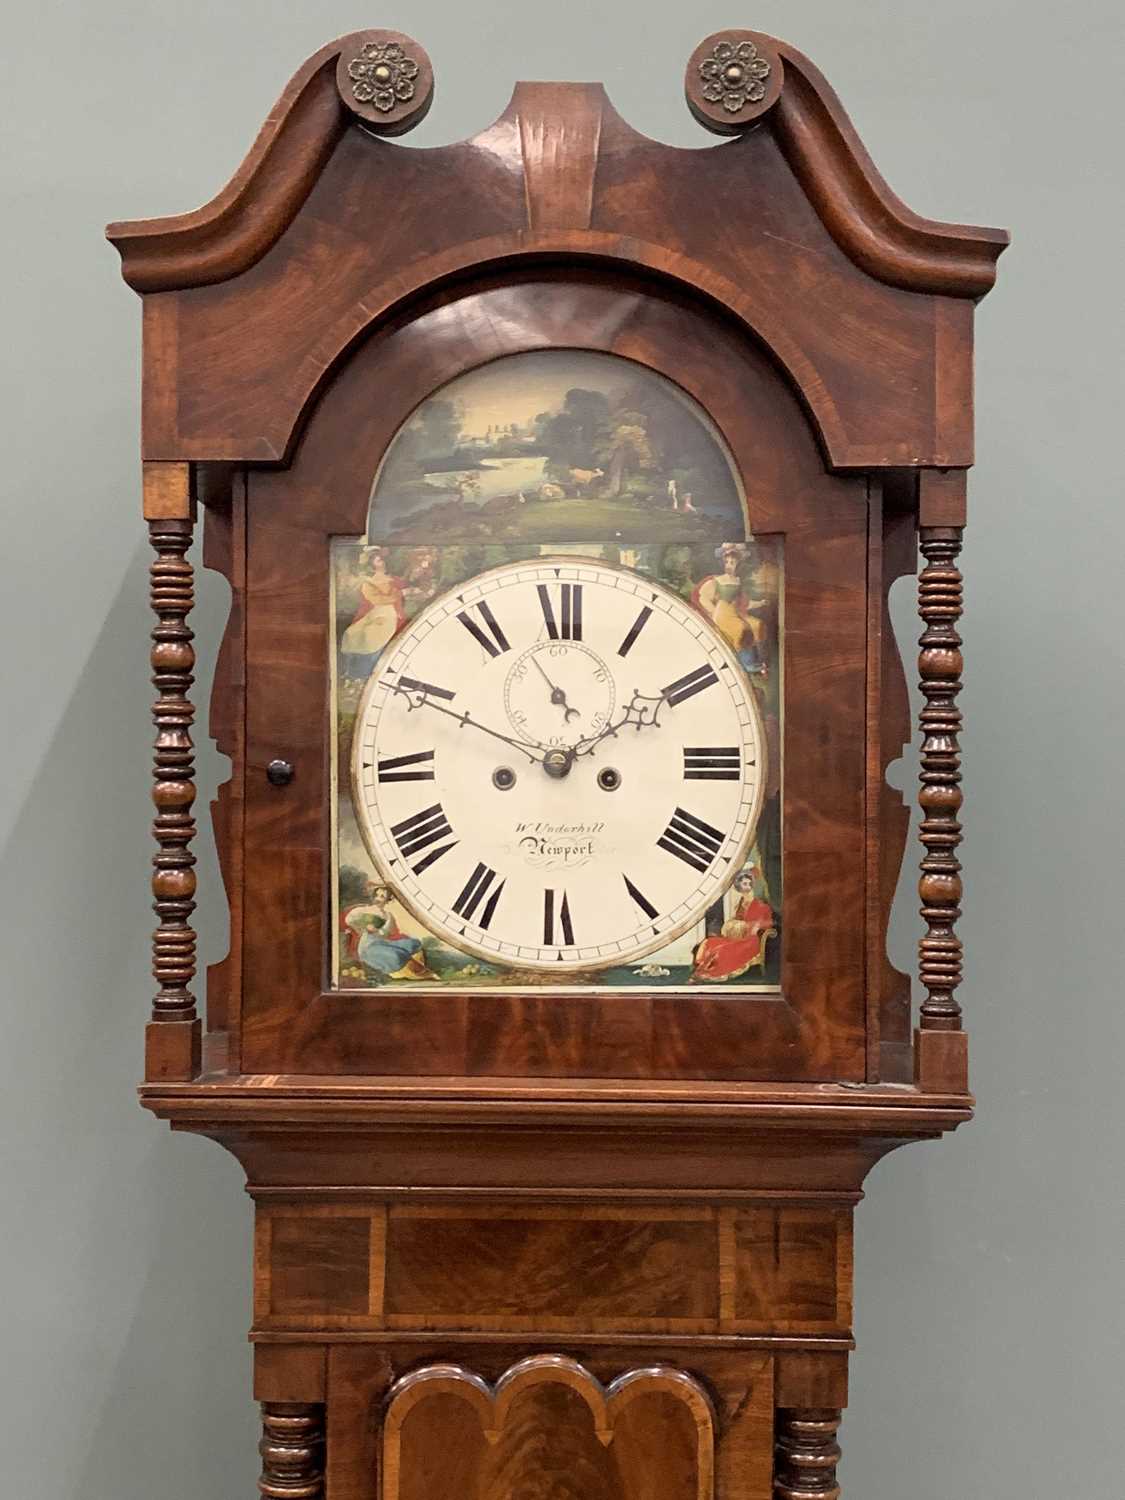 VICTORIAN MAHOGANY LONGCASE CLOCK BY W UNDERHILL, NEWPORT, the arched top dial with painted